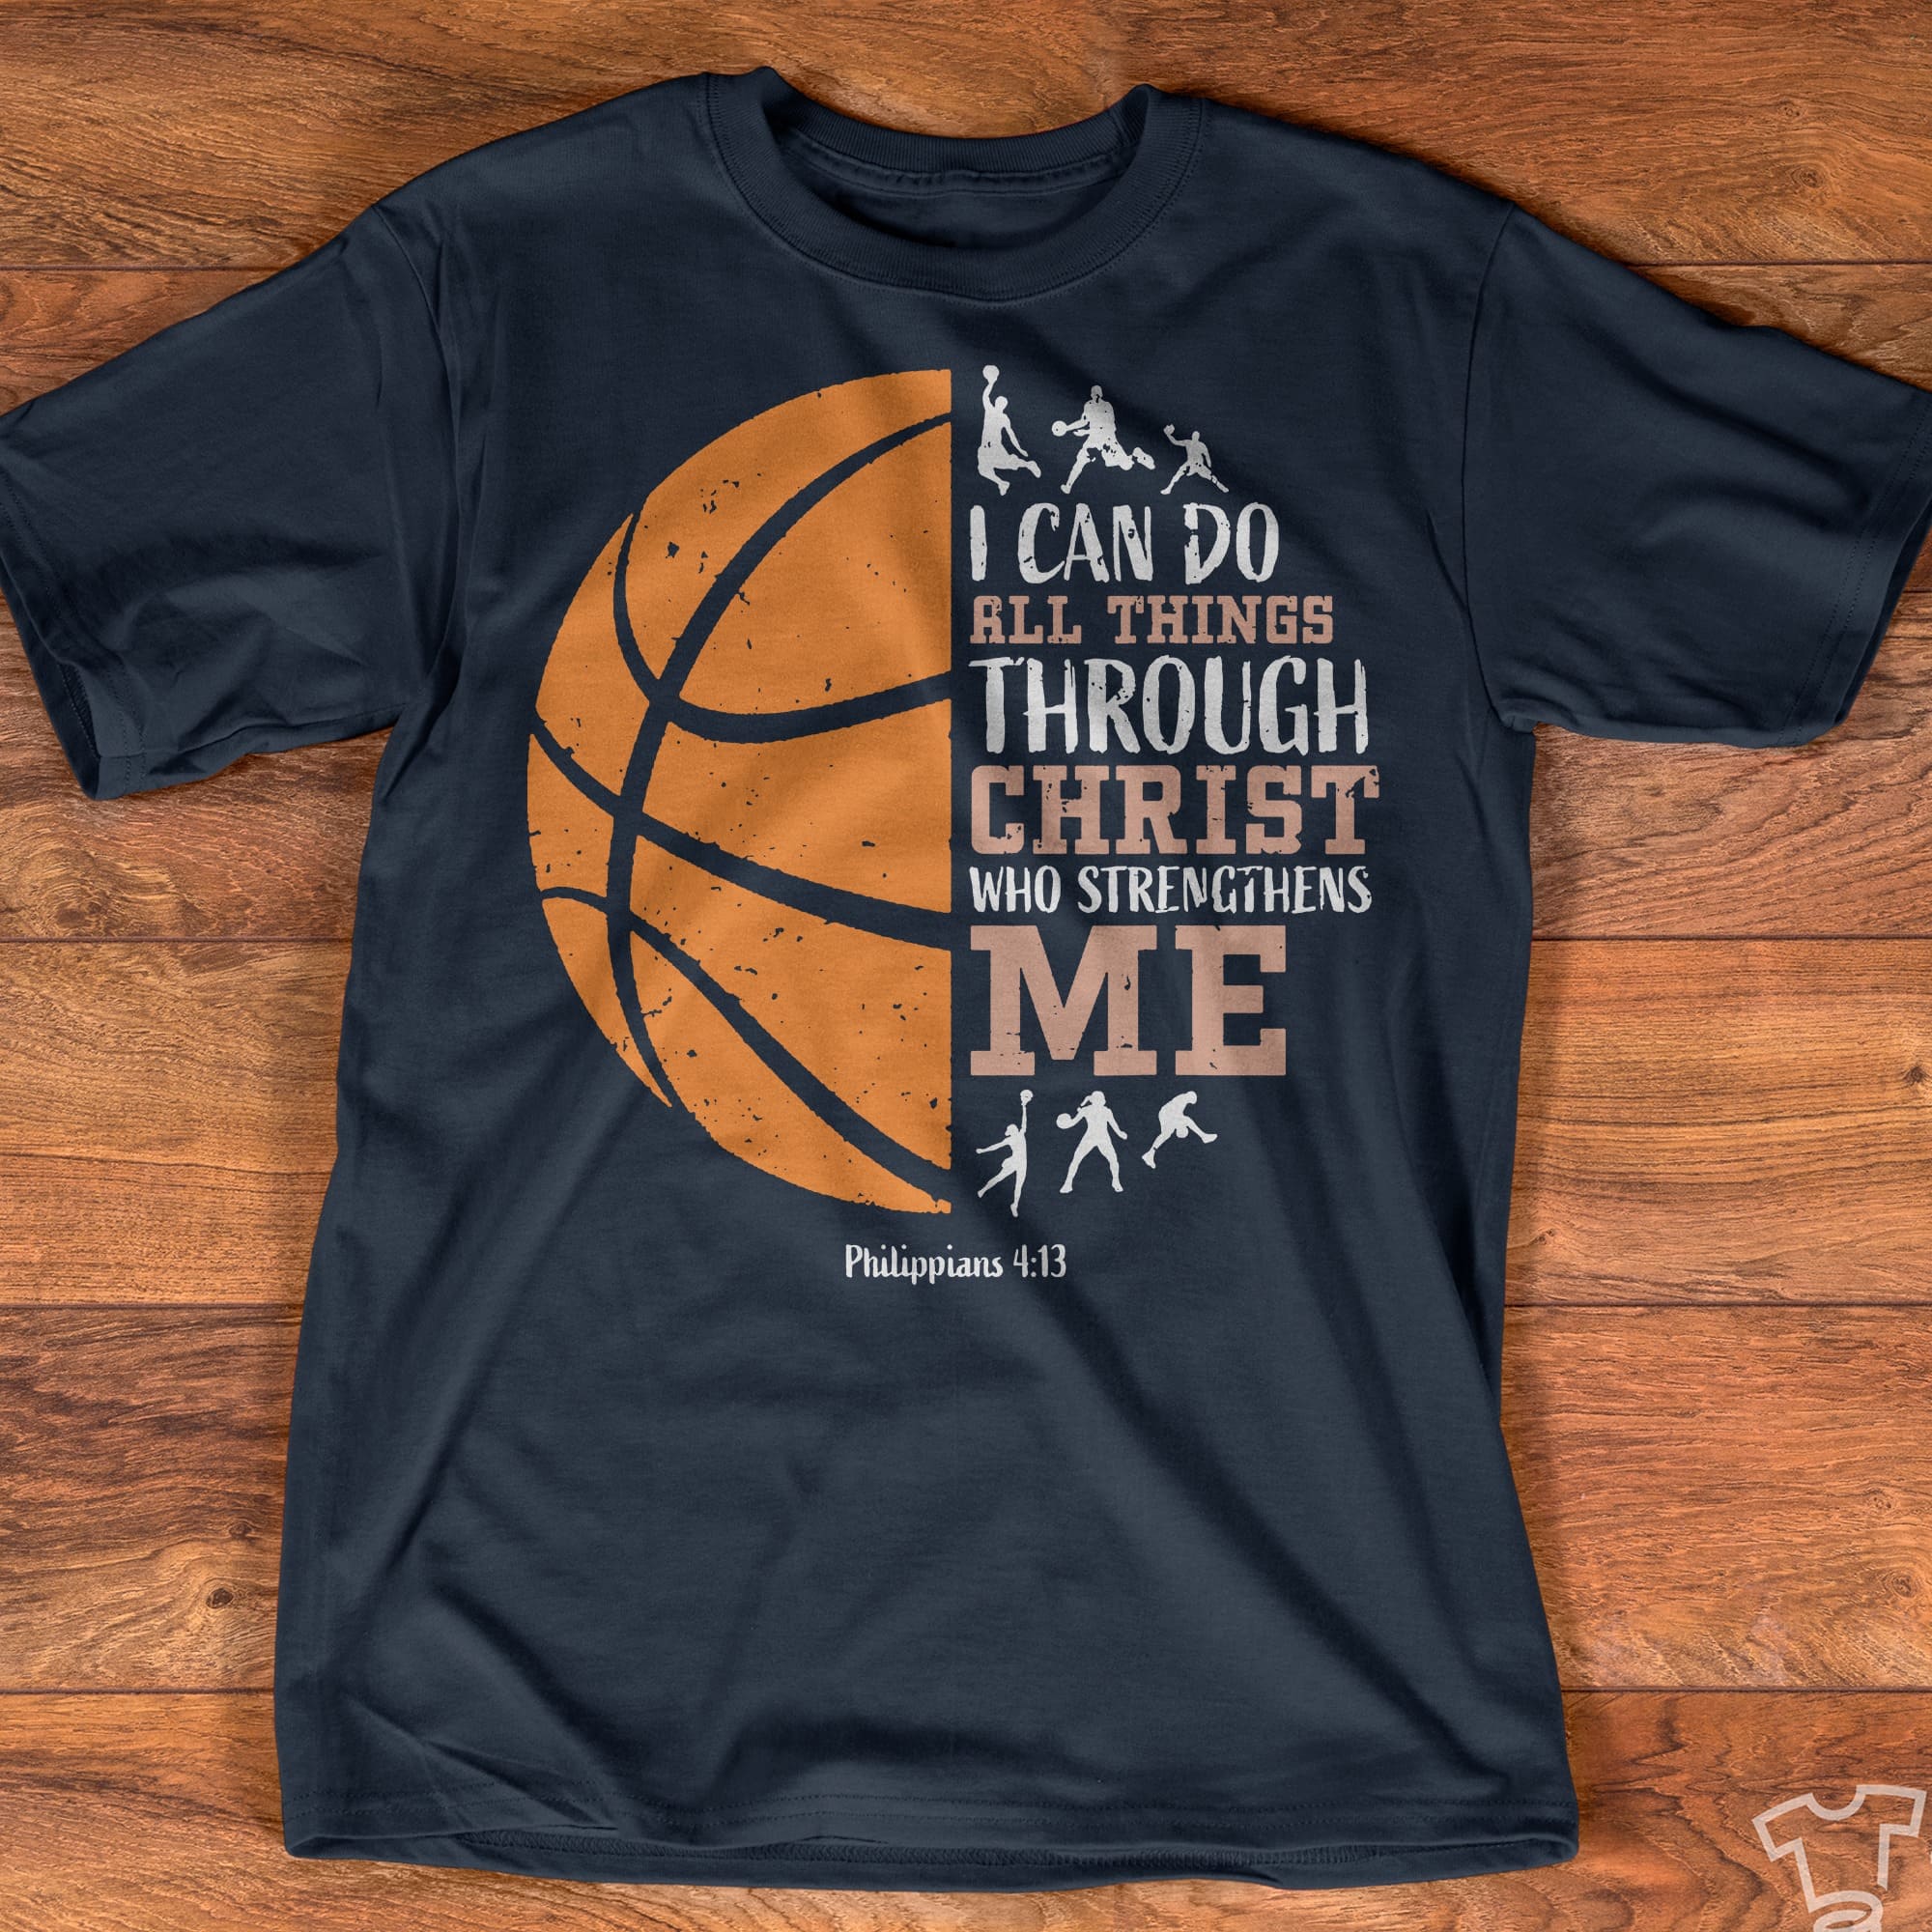 I can do all things through Christ - God strengthens me, Basketball player T-shirt